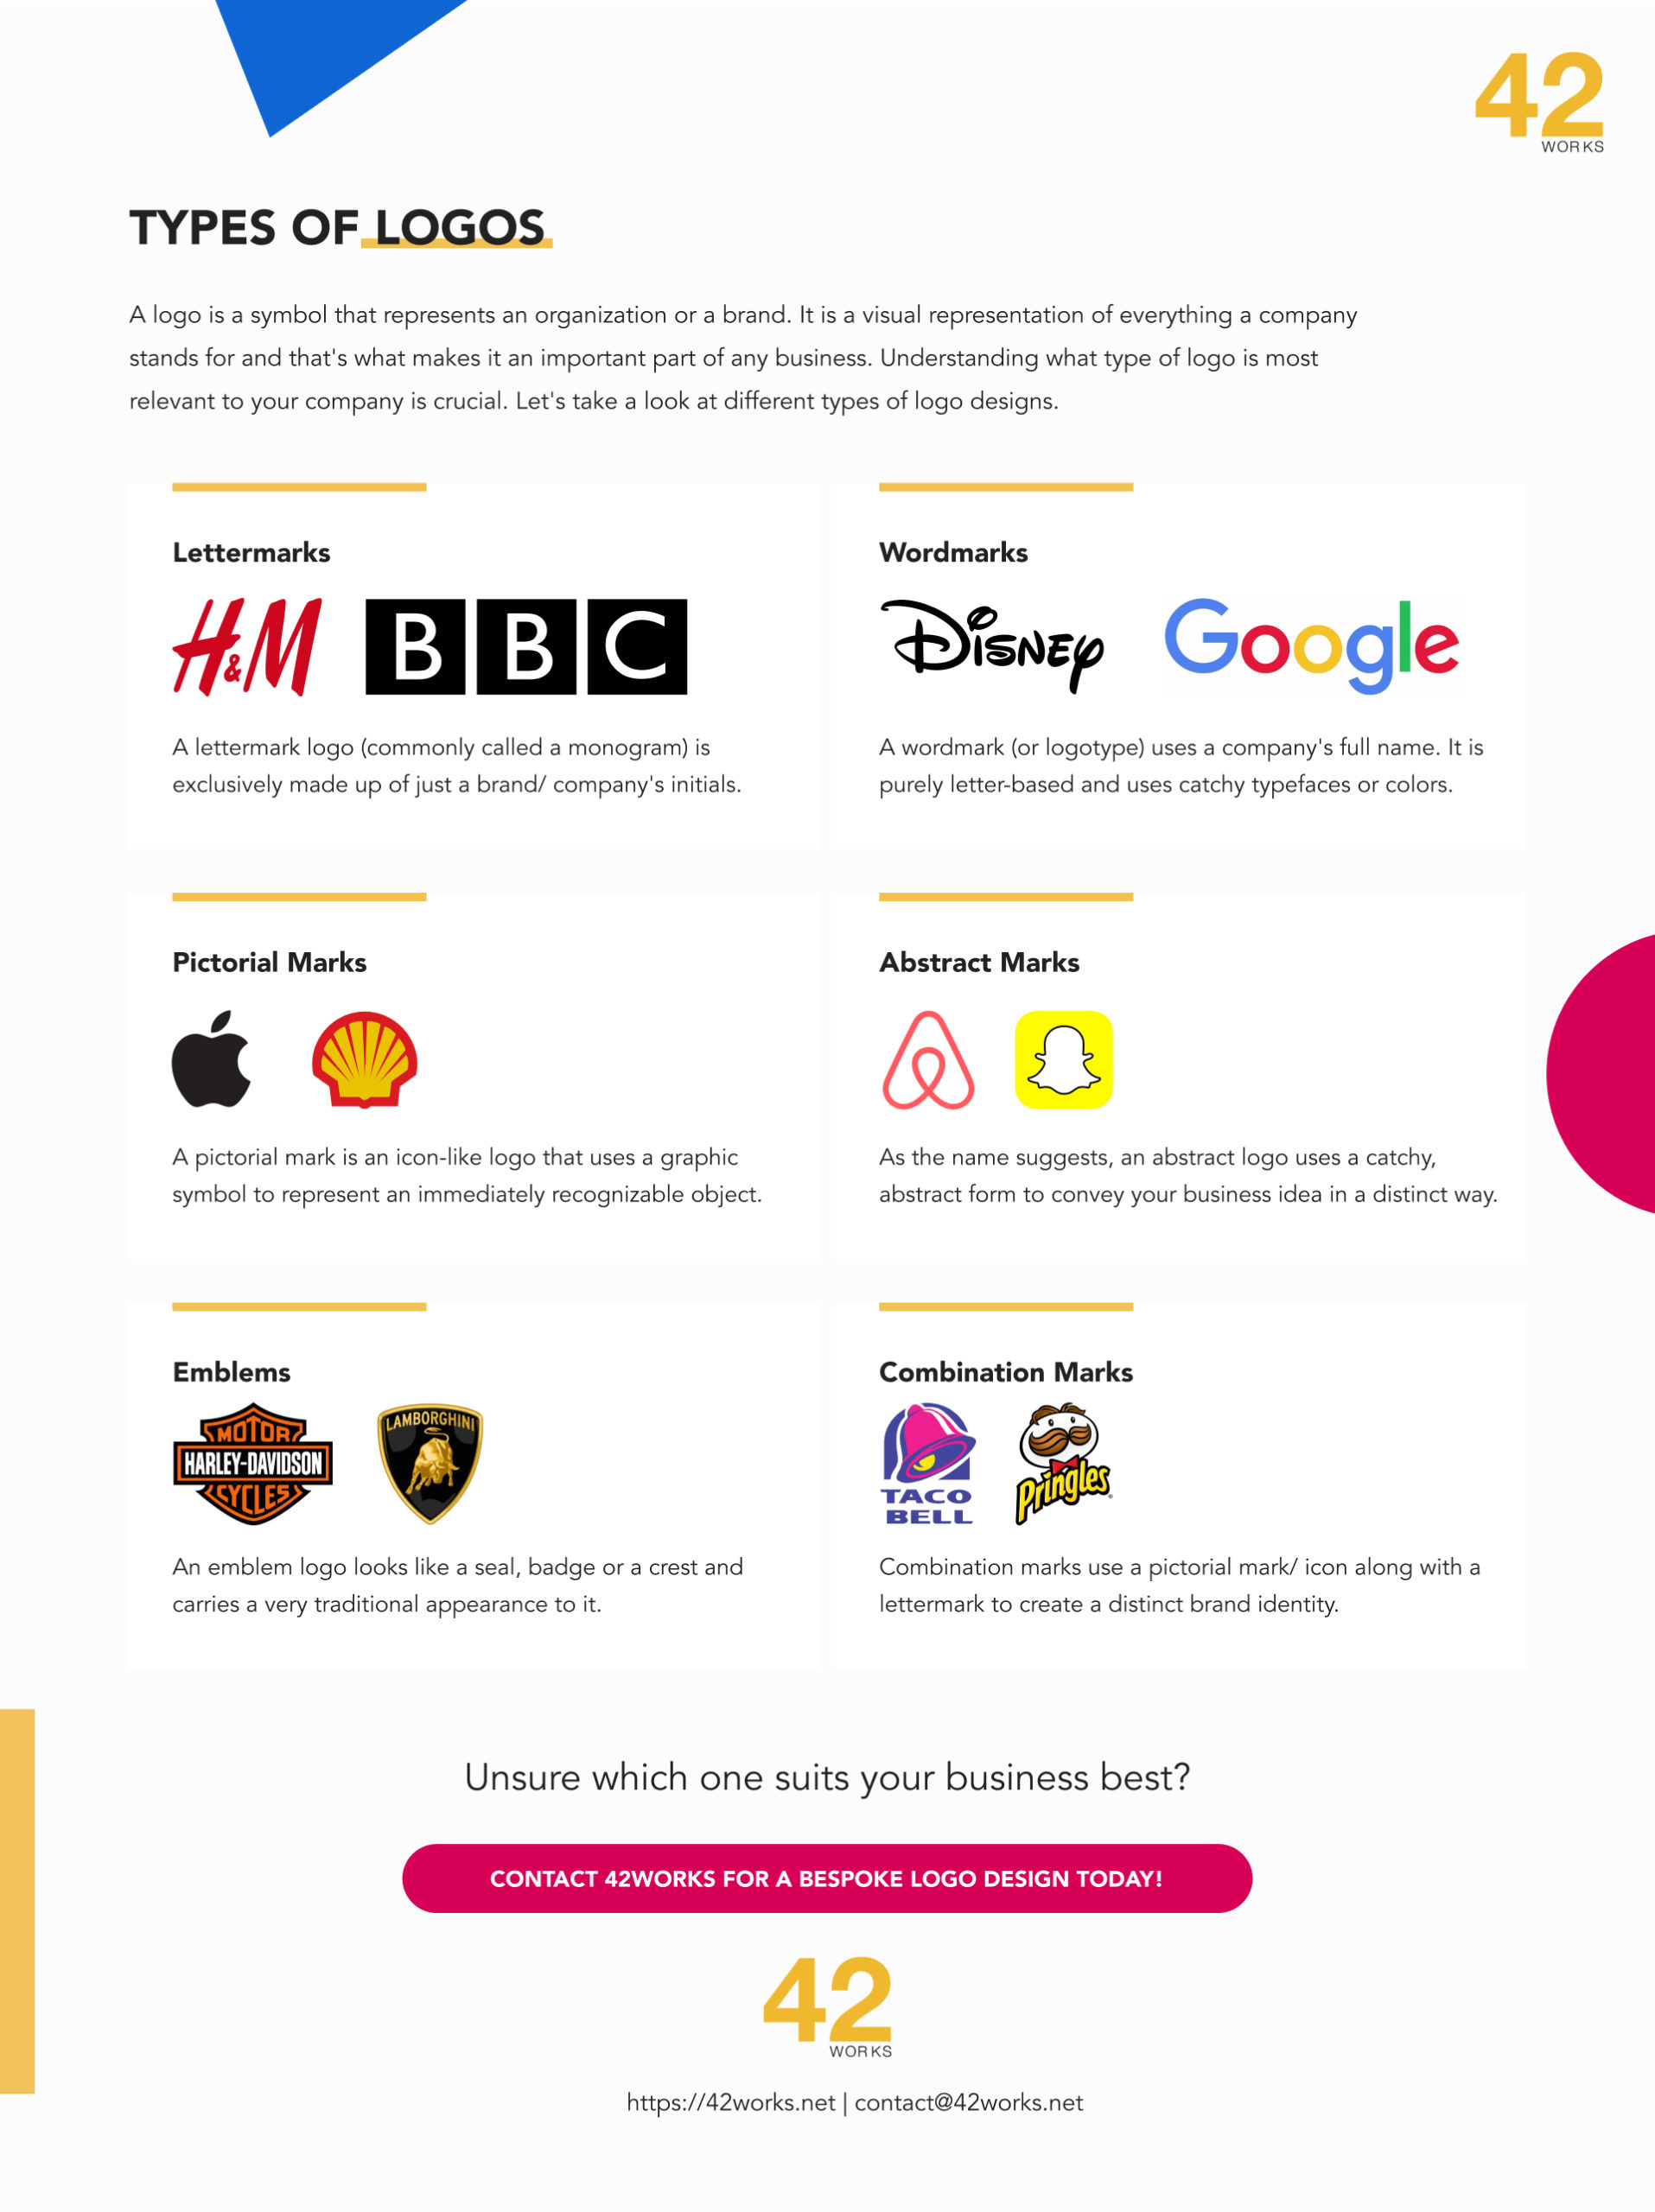 Infographic on Types of logos